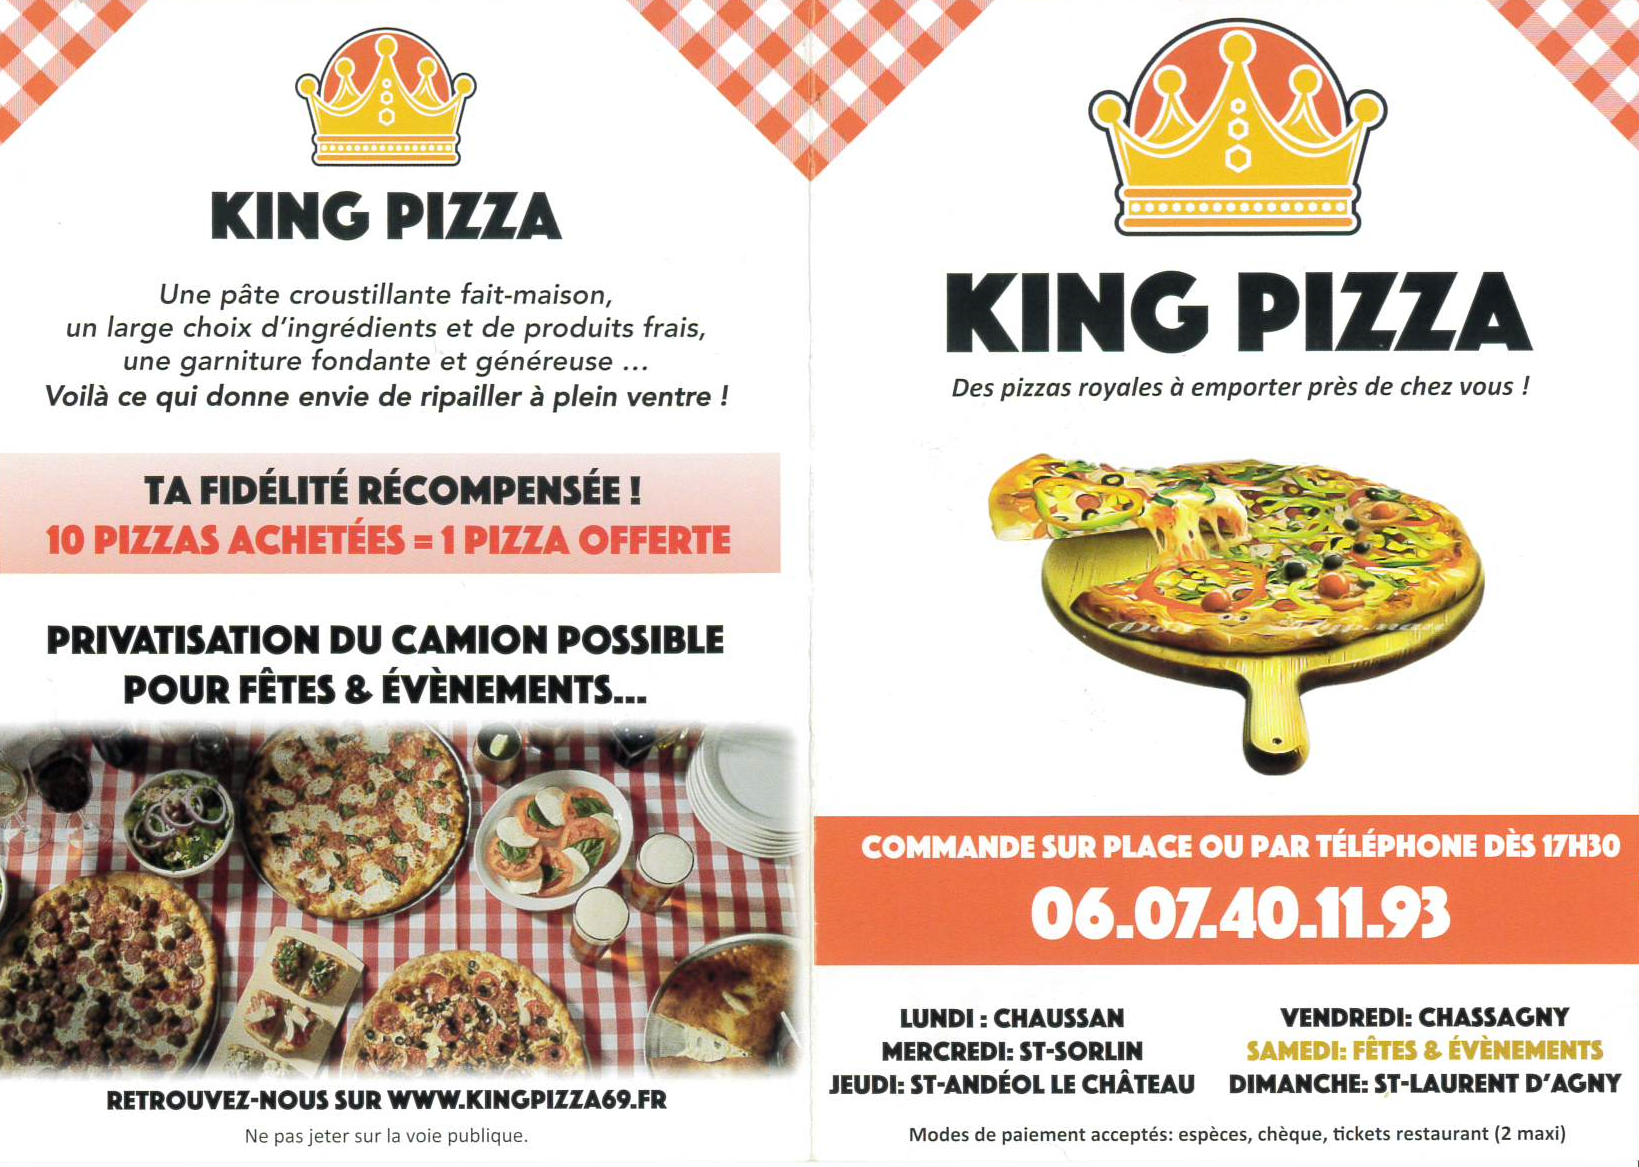 KING PIZZA